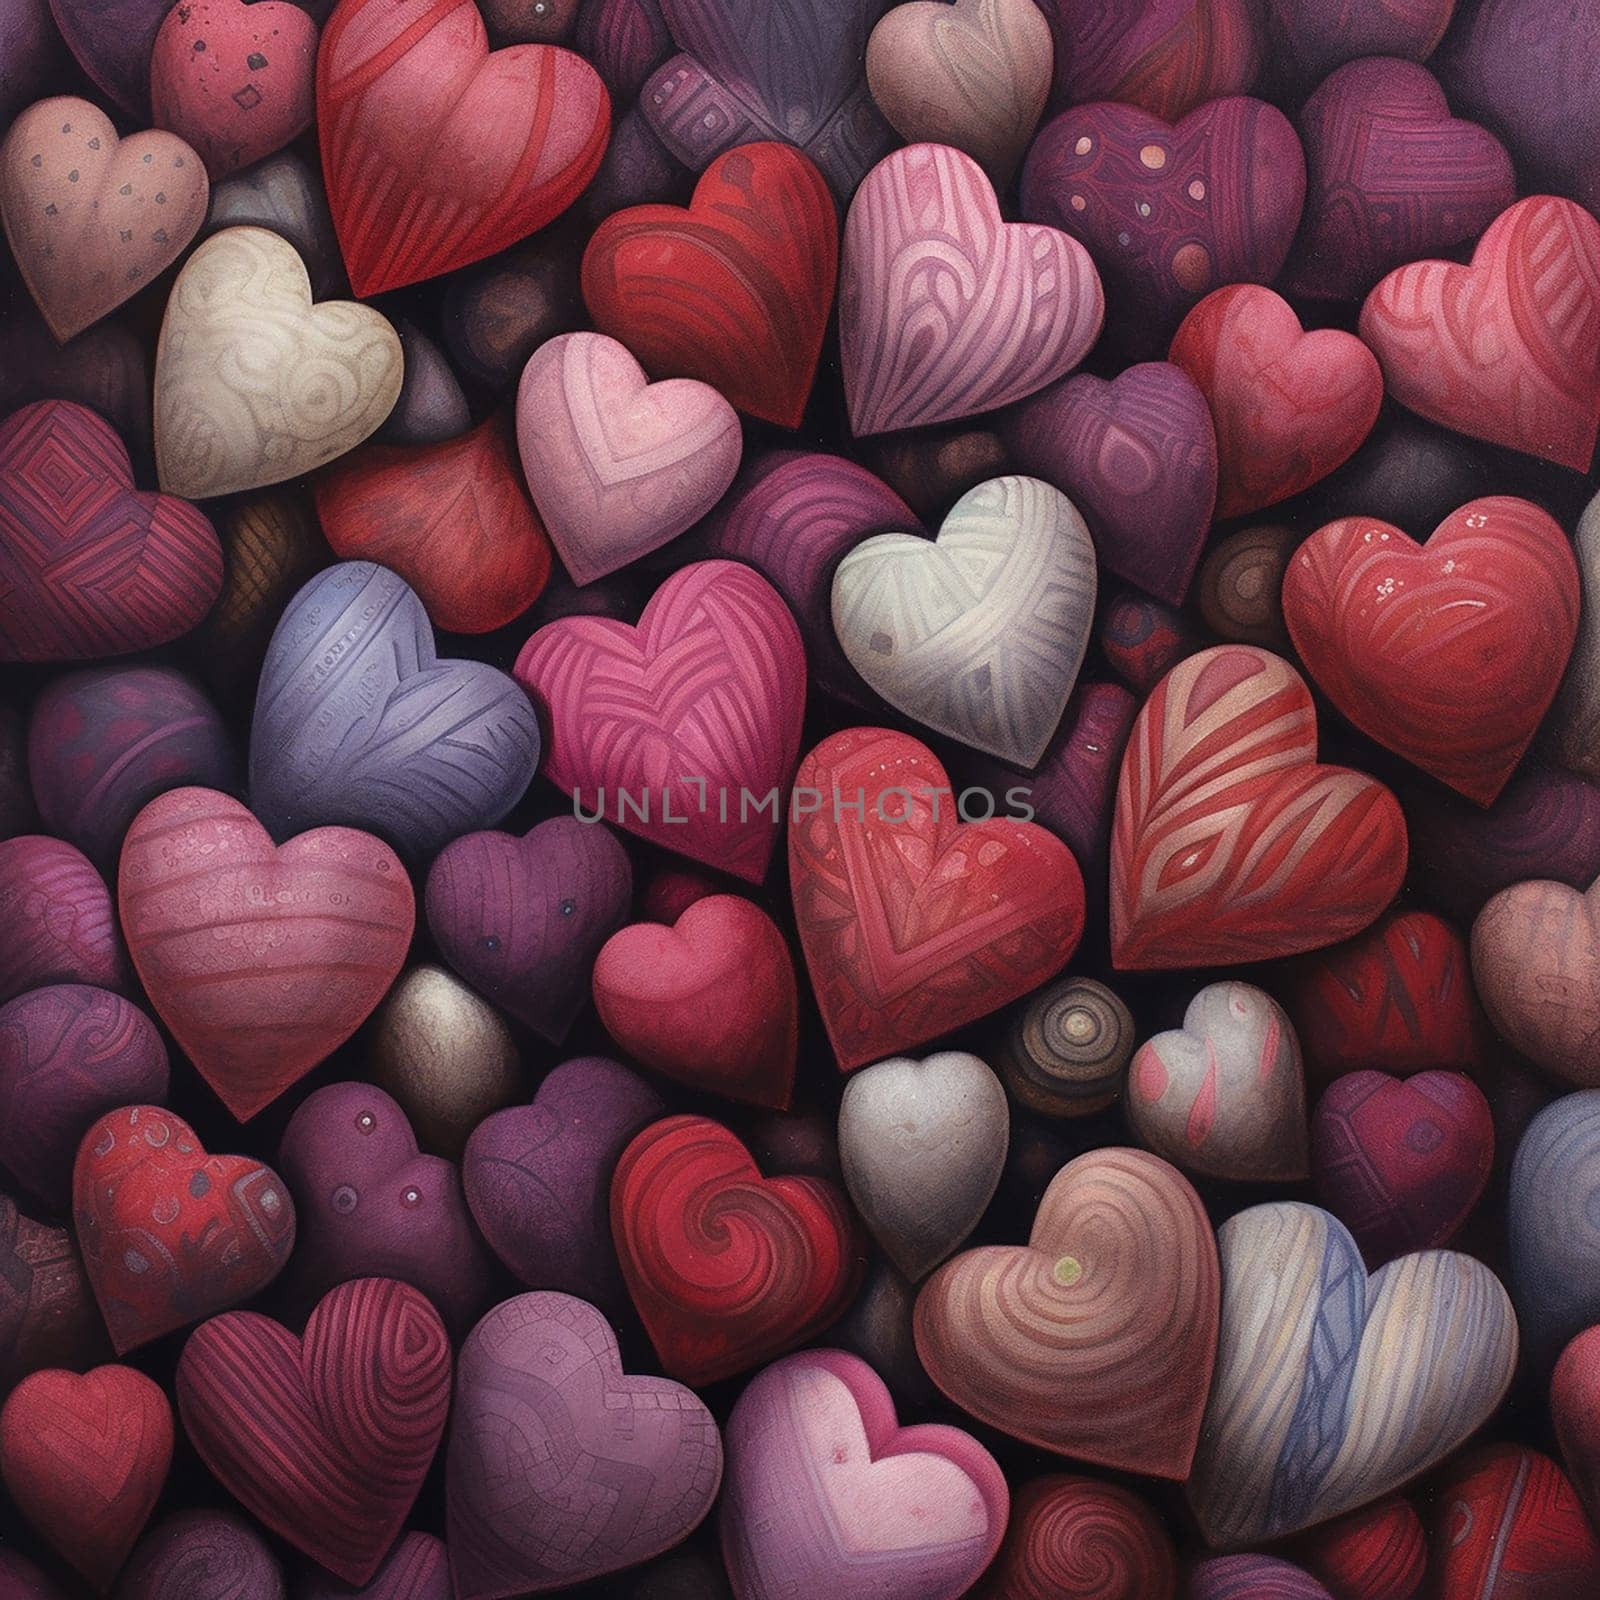 Multitude of stylized hearts in various shades and patterns